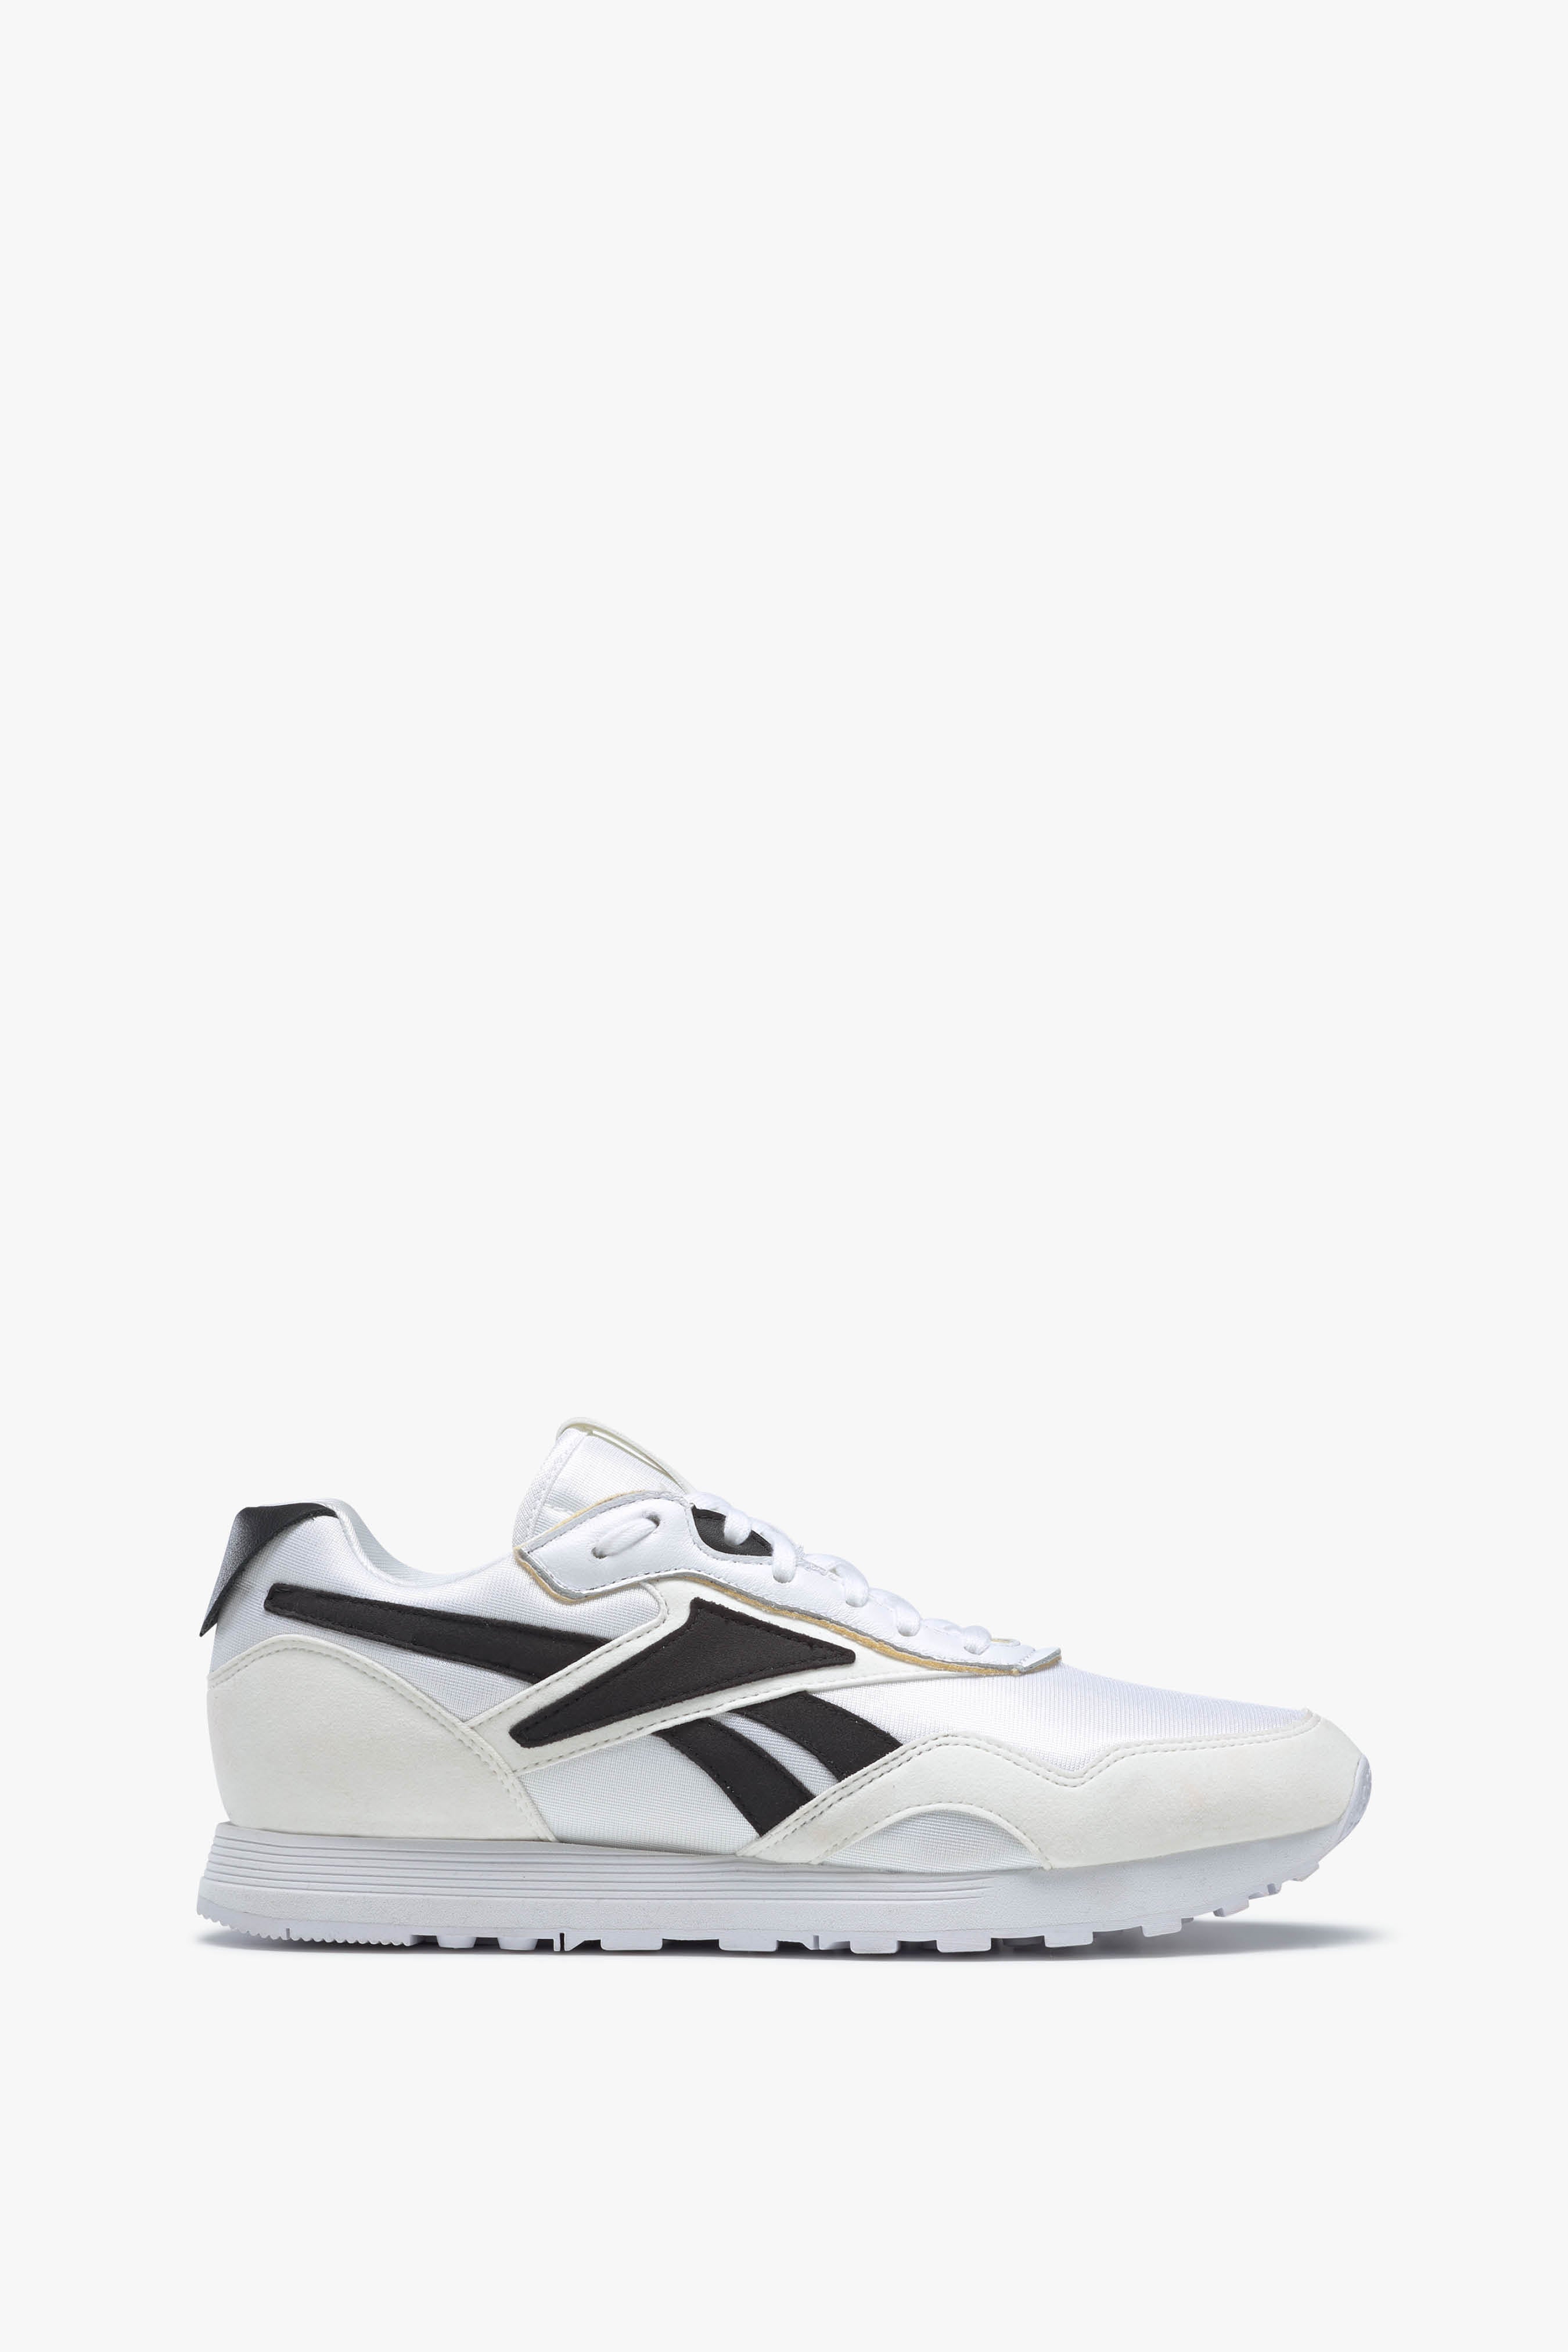 Reebok x VB Rapide Sneaker in White and Black – Beckham US